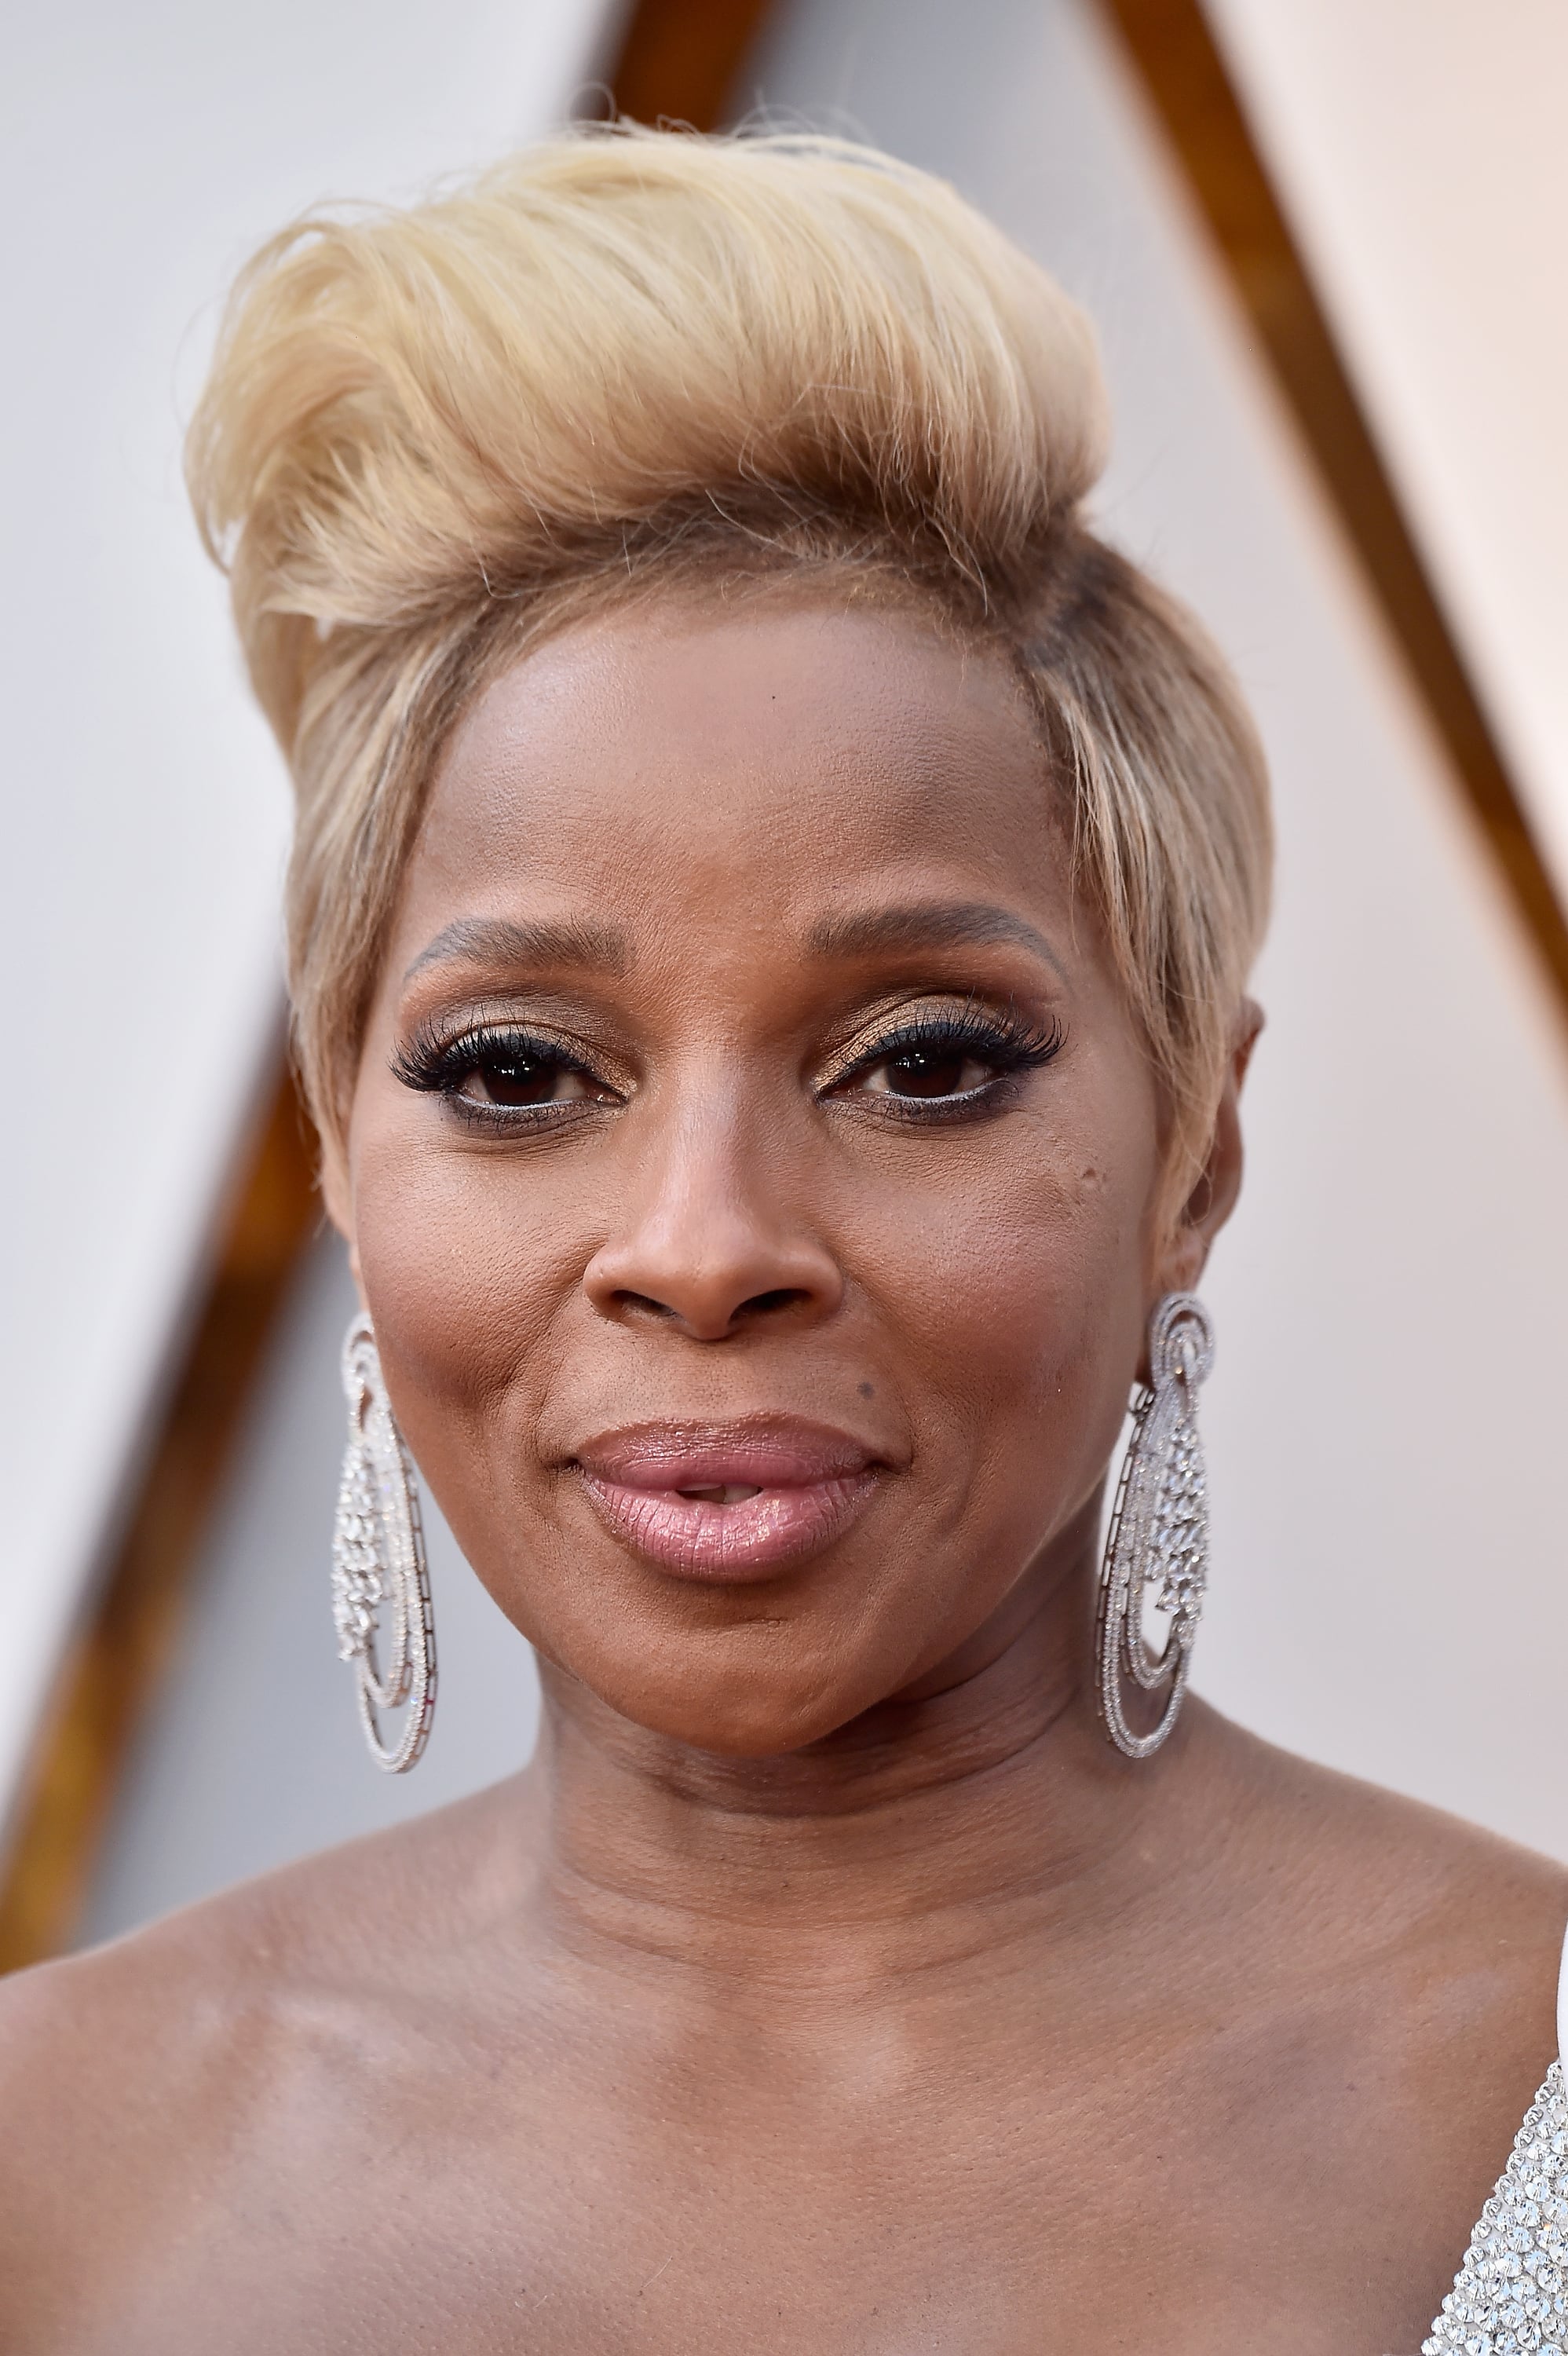 Mary J Blige Feast Your Eyes On The Most Stunning Beauty Looks